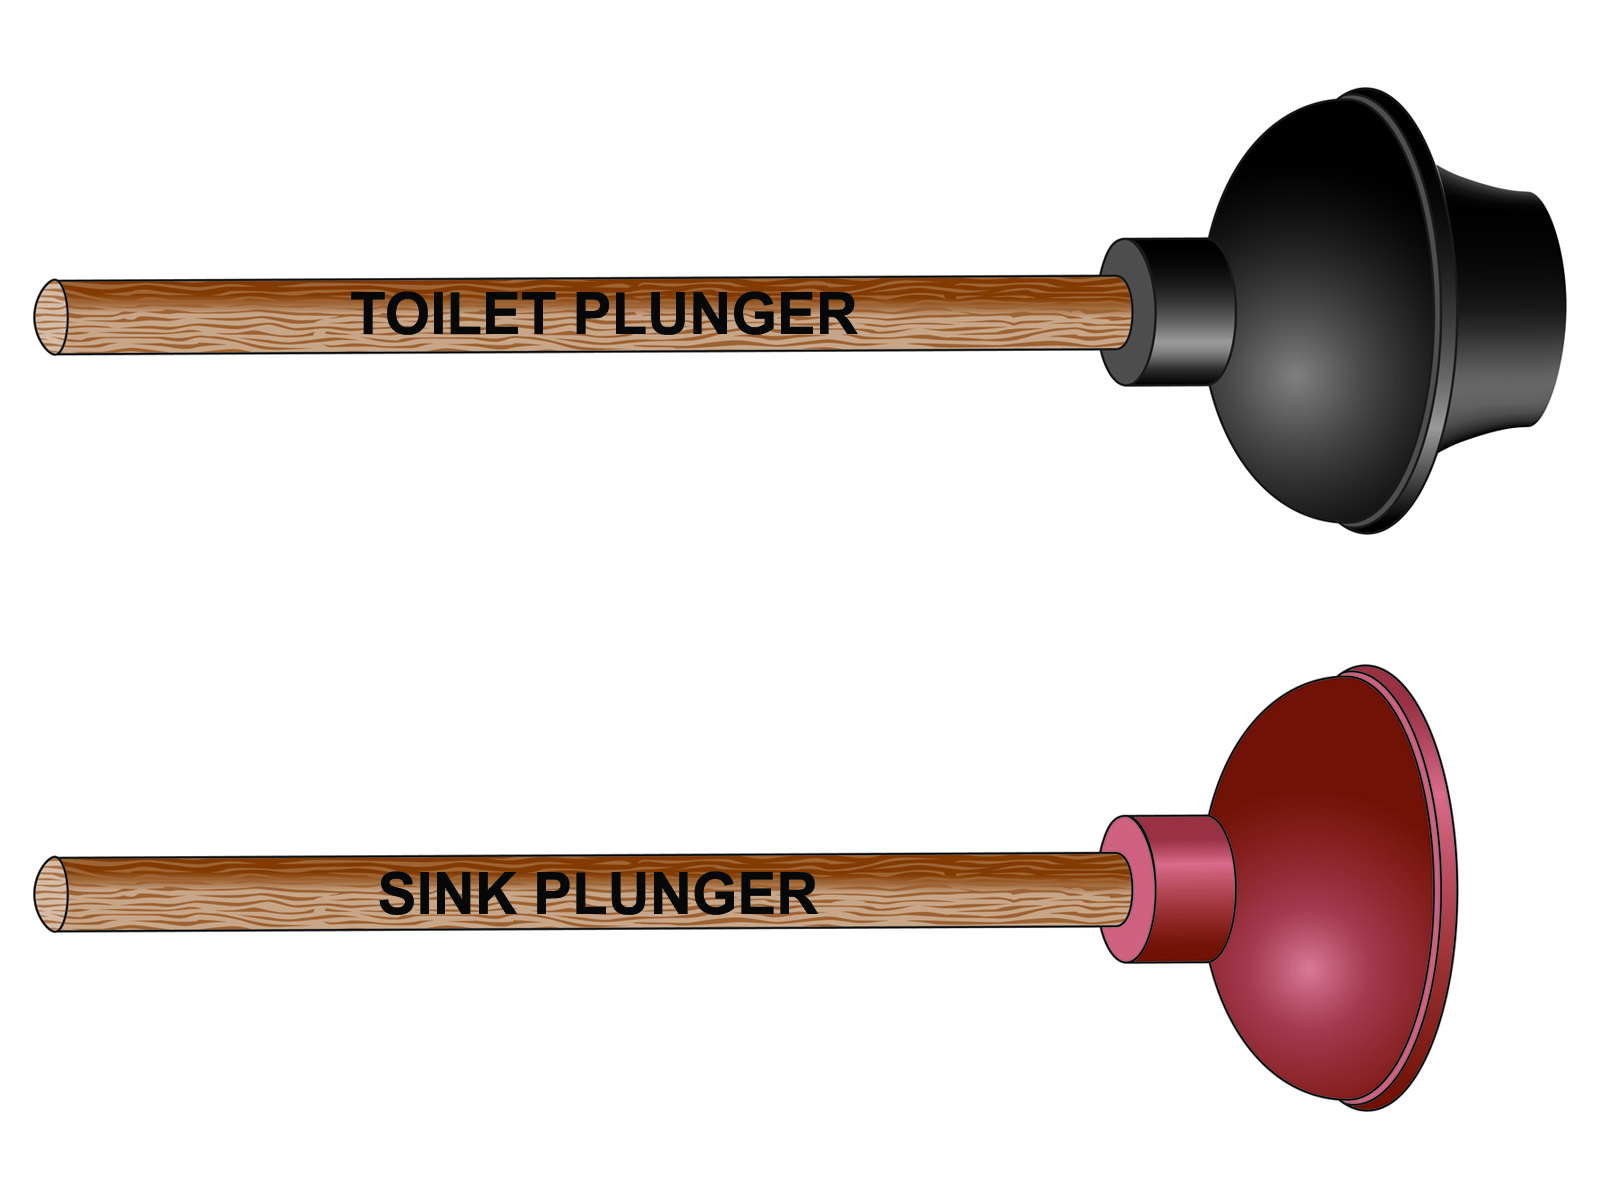 Toilet and drain plungers are different in design and functionality.